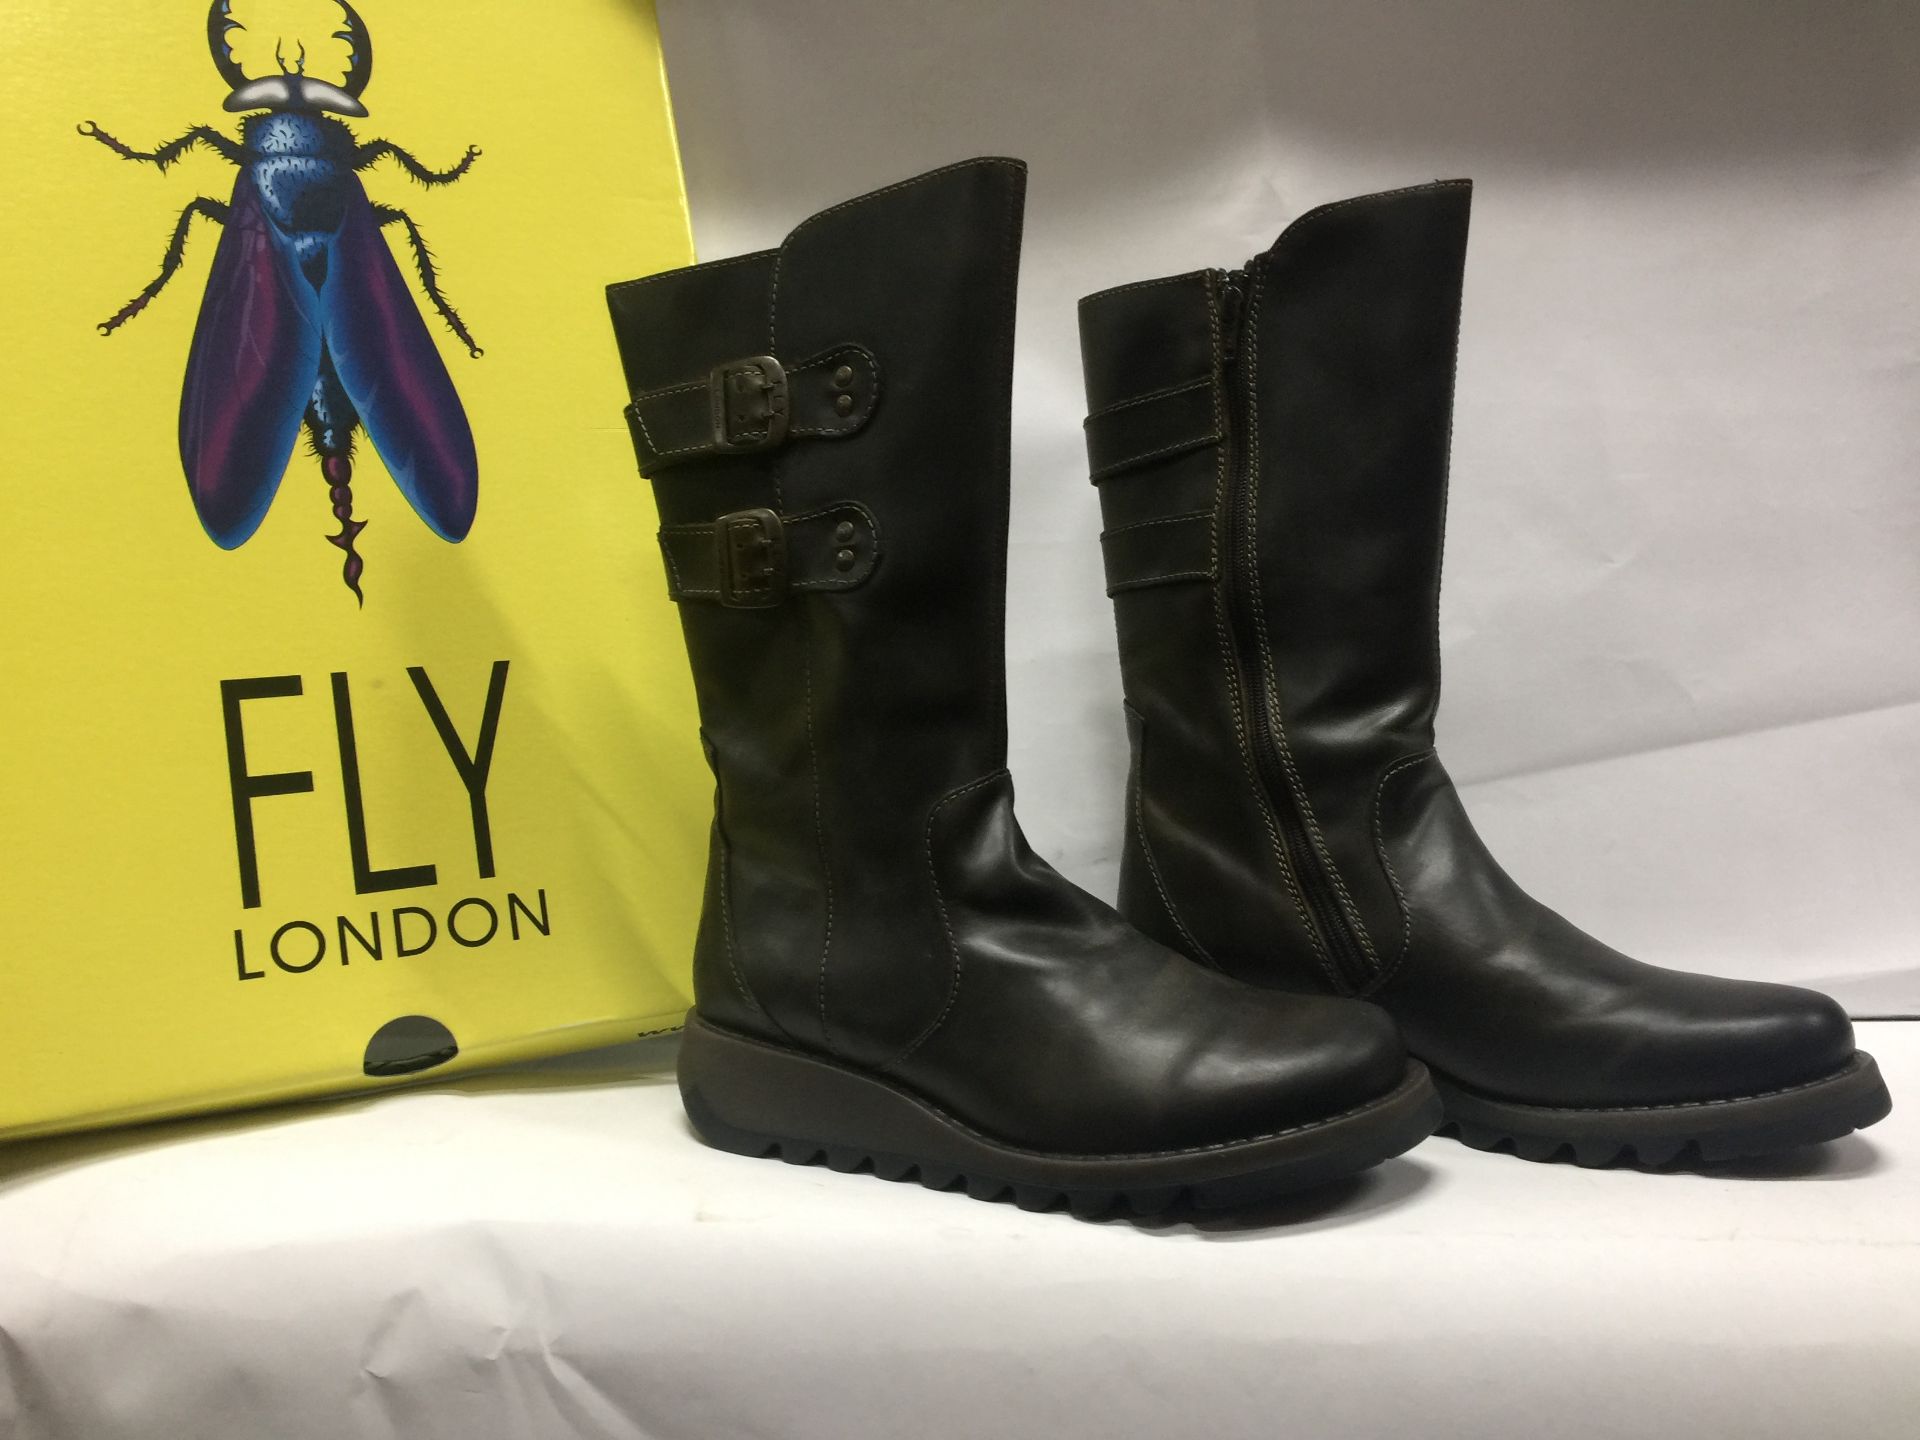 5 x Fly London Women's Boots Mixed Sizes, Styles and Colours Size Ranging EU 37 - EU 39 - Customer R